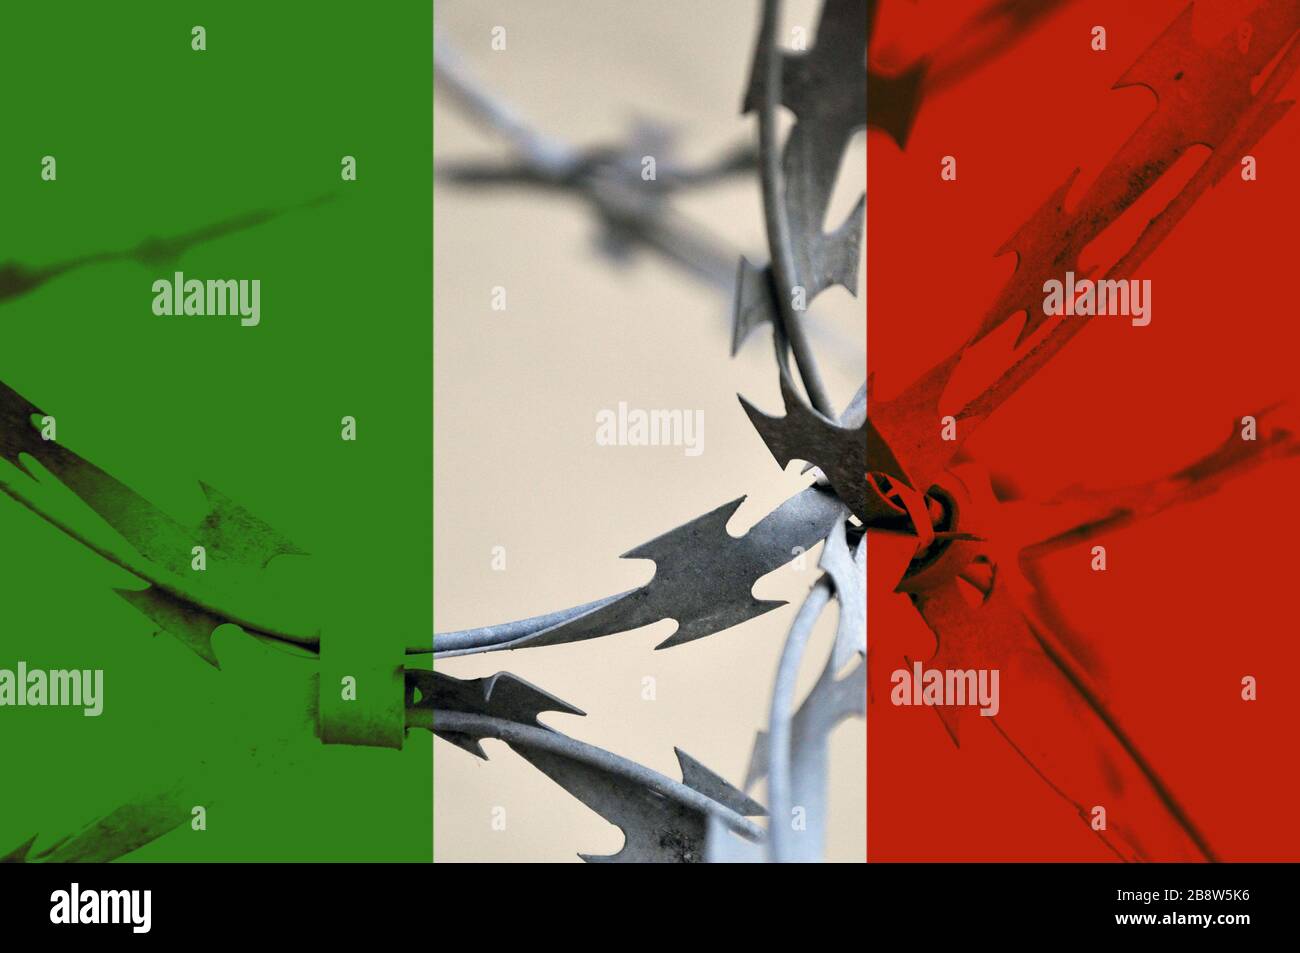 The Italian flag is bound with barbed wire. Country isolation concept. Stock Photo